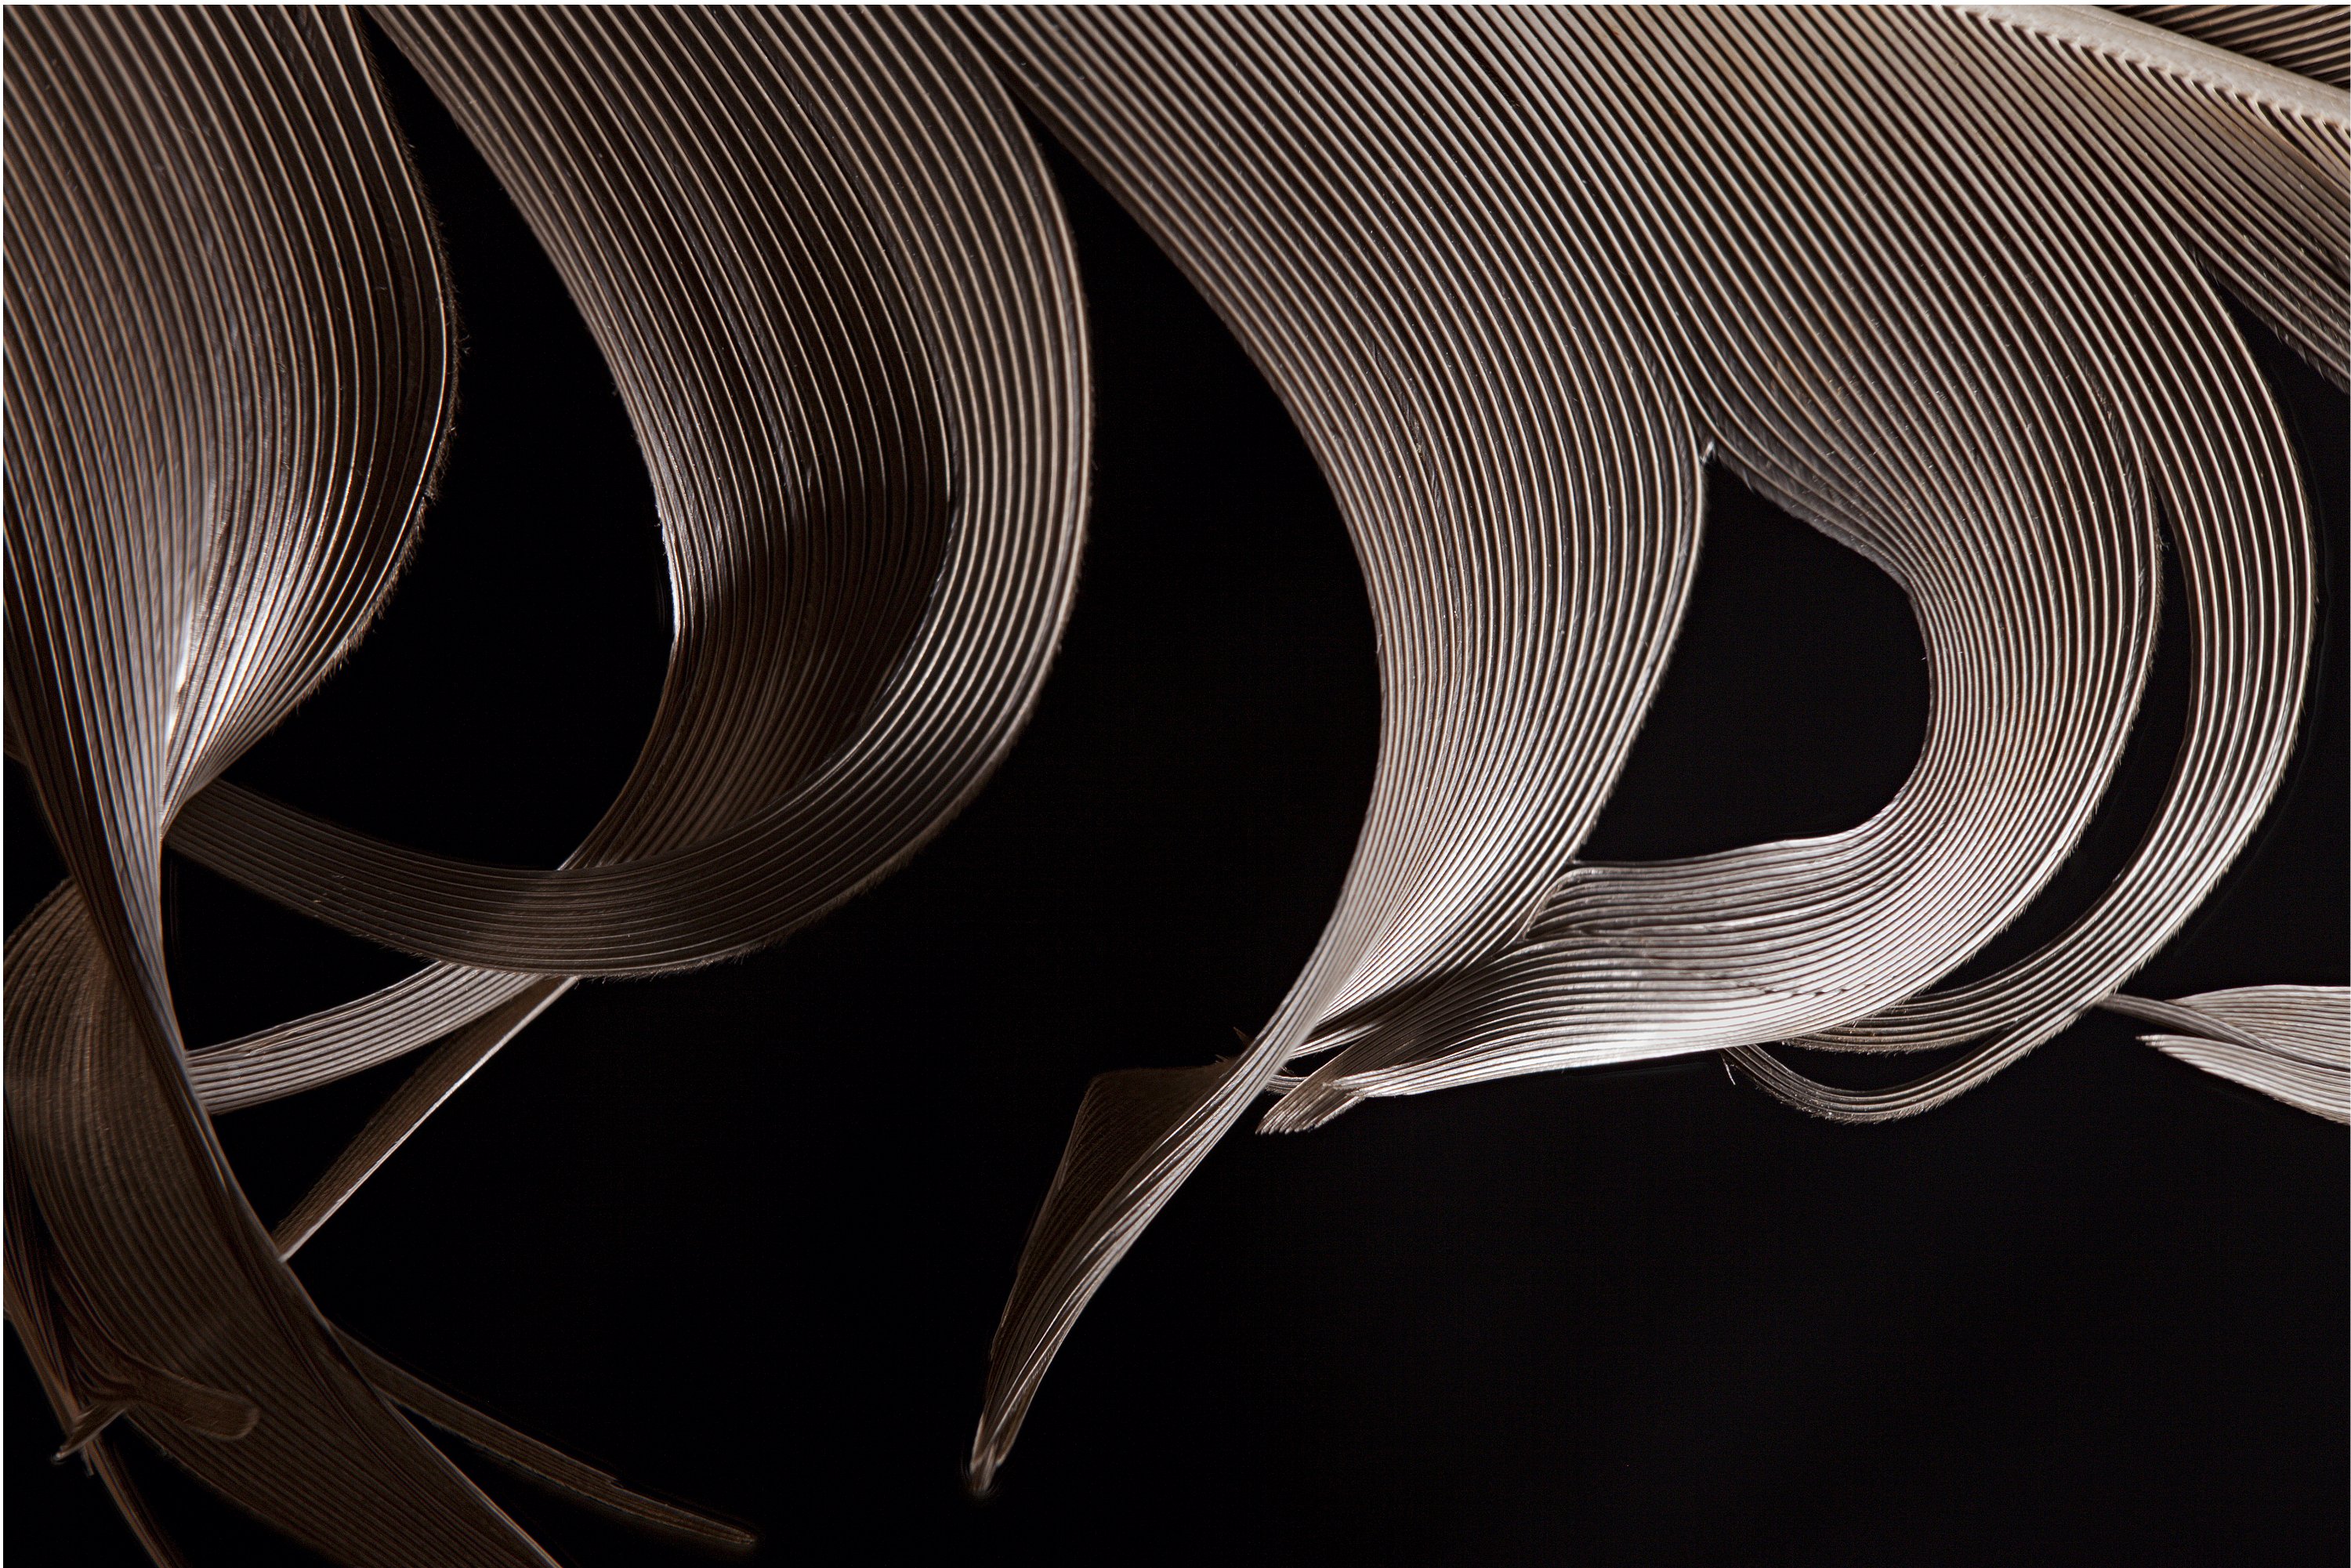 James Henderson Creates “Featherscapes” Using Beautiful Bird Feathers